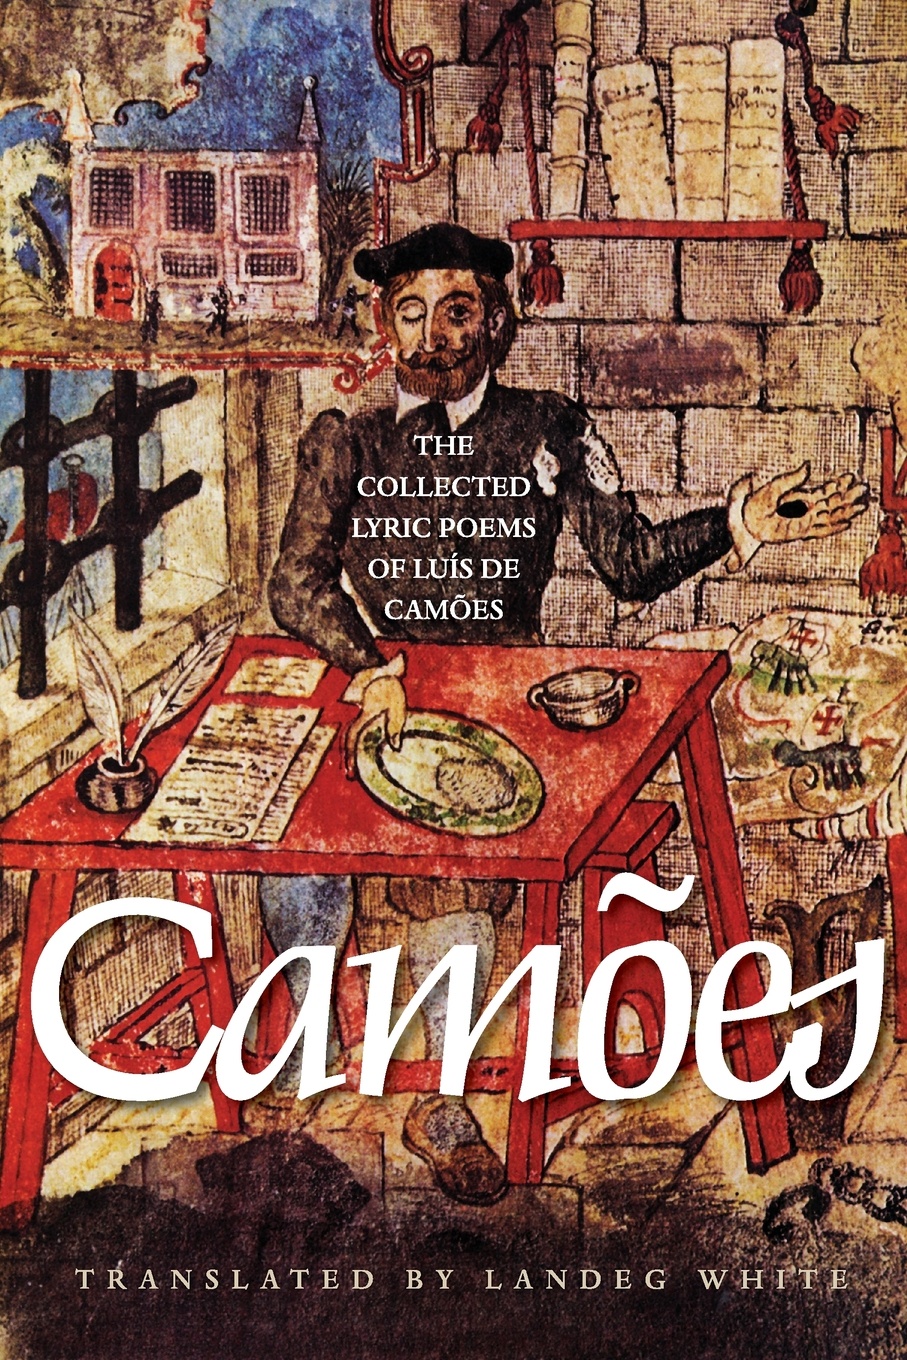 The Collected Lyric Poems of Luis de Camoes